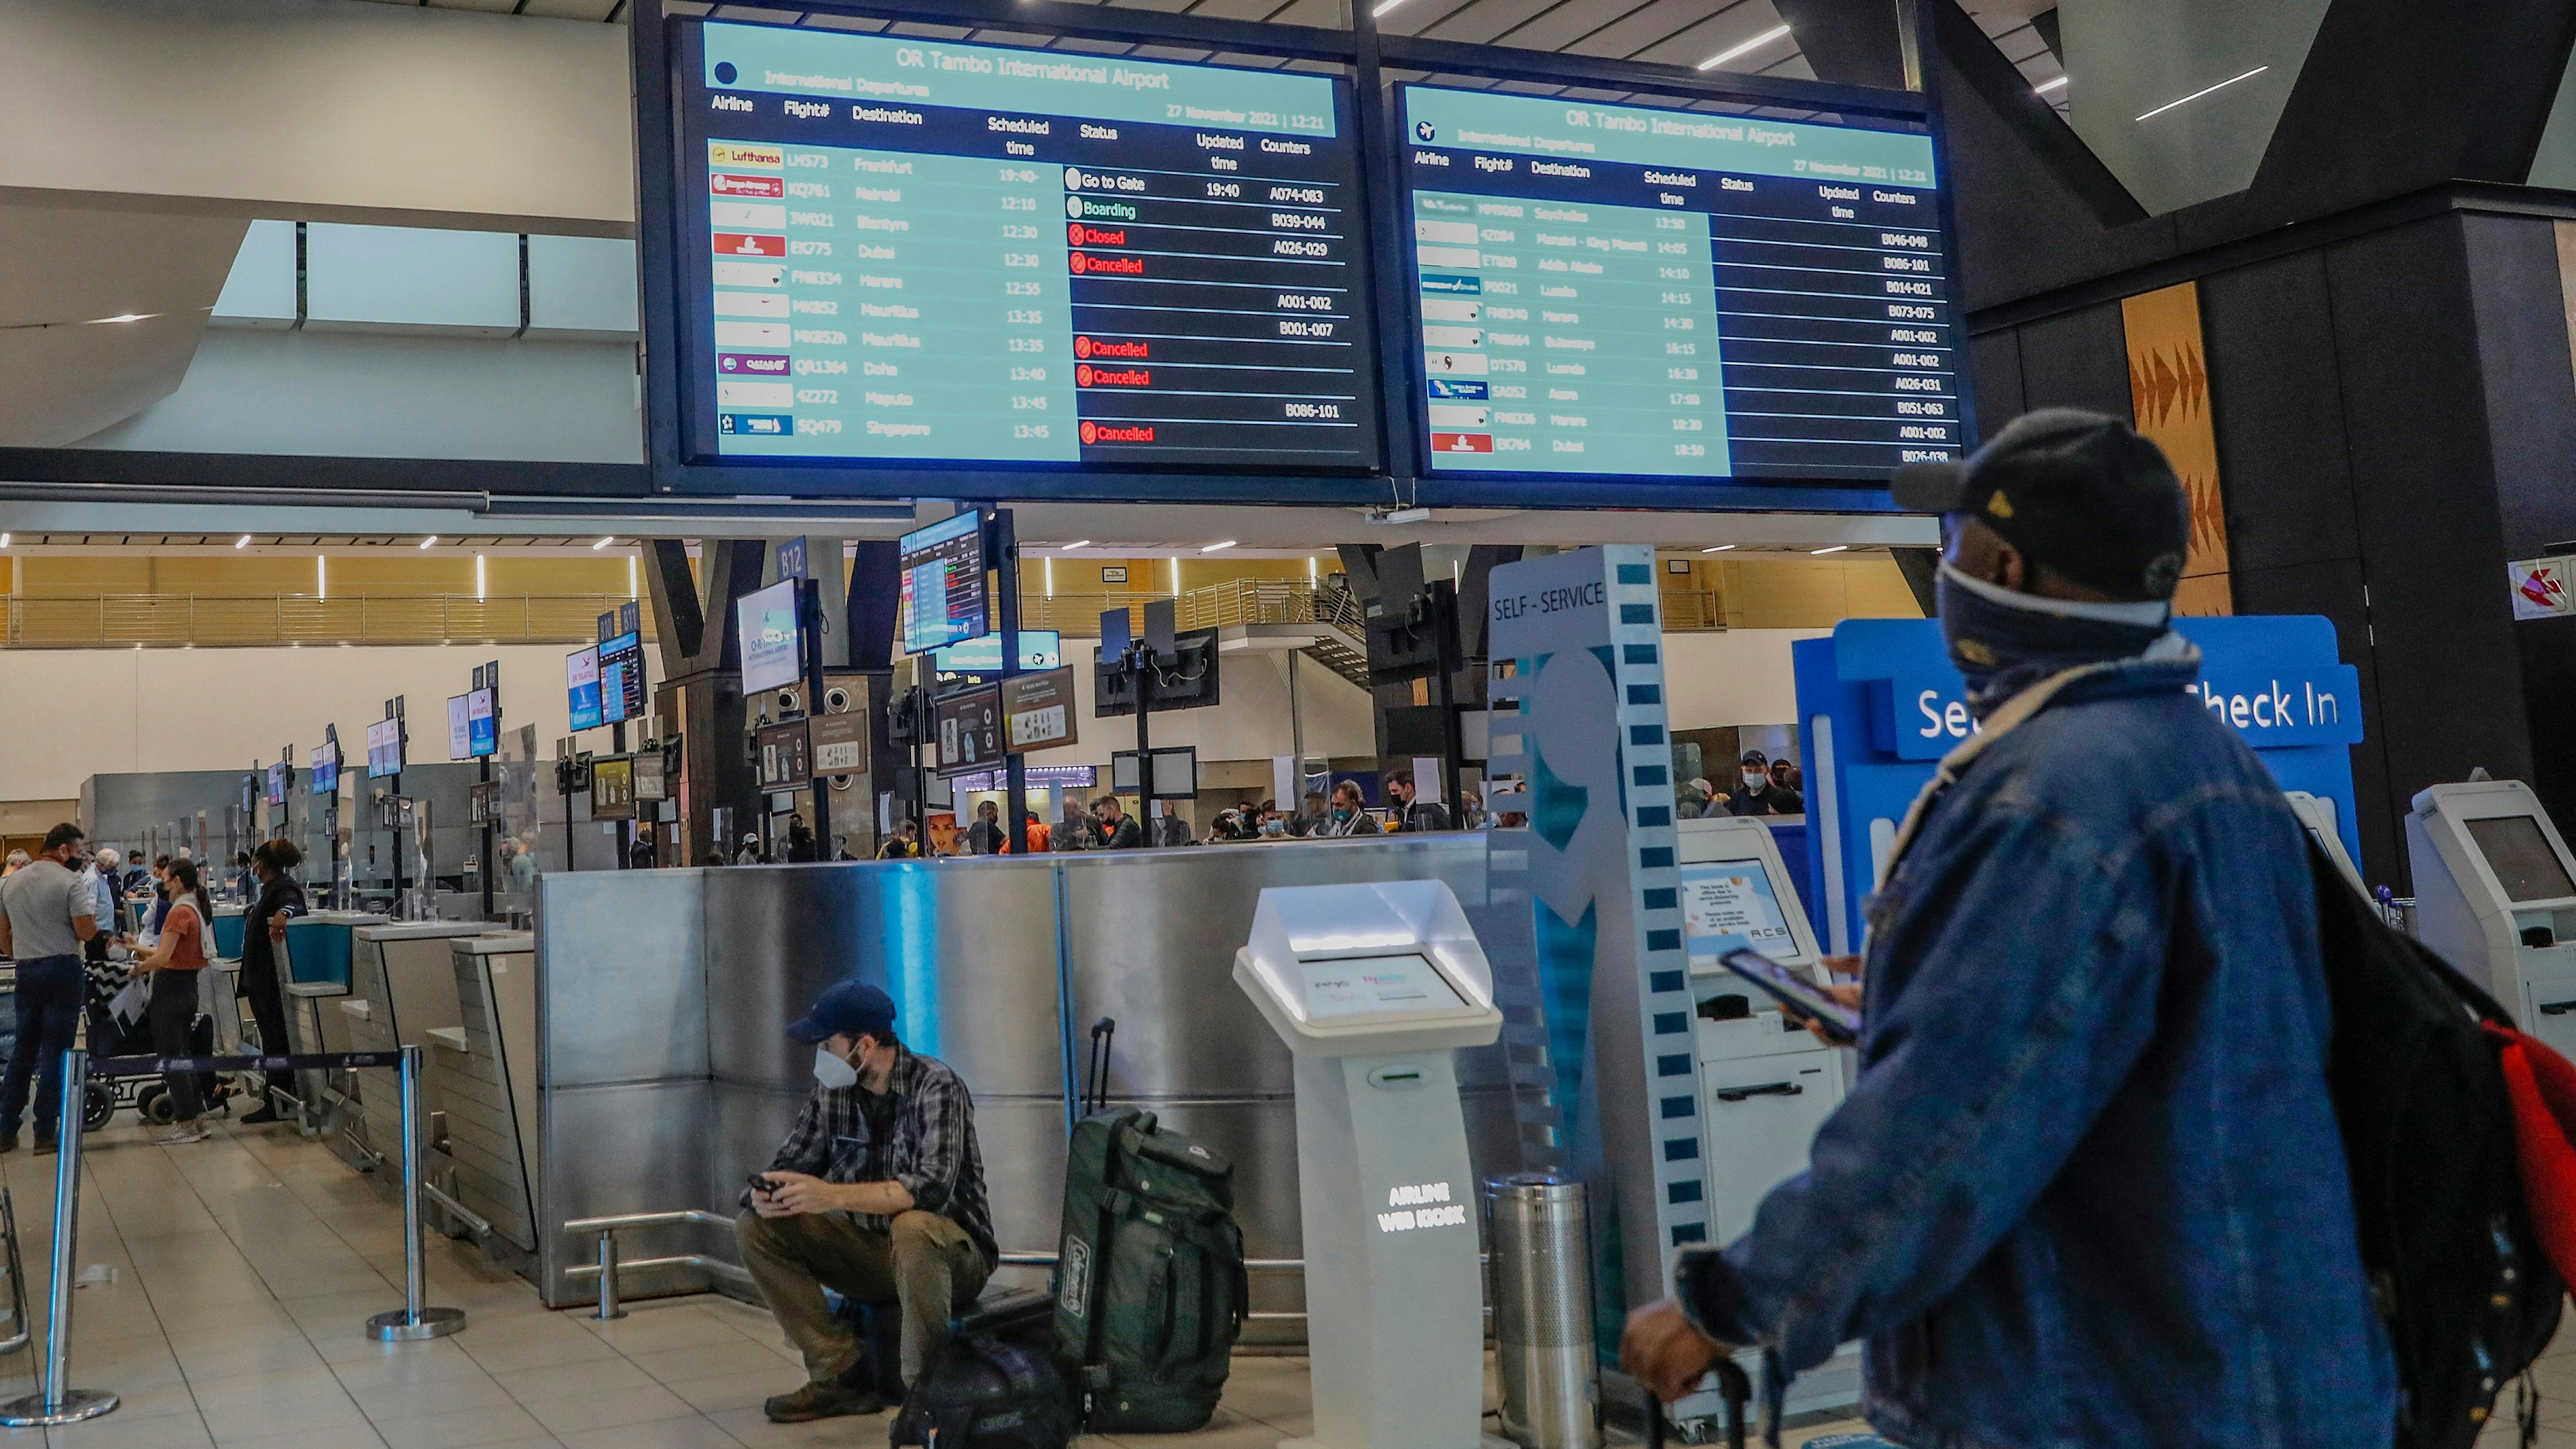 A passenger holds his mobile phone while looking at an electronic flight notice board displaying cancelled flights at OR Tambo International Airport in Johannesburg after several countries banned flights from South Africa following the discovery of Omicron